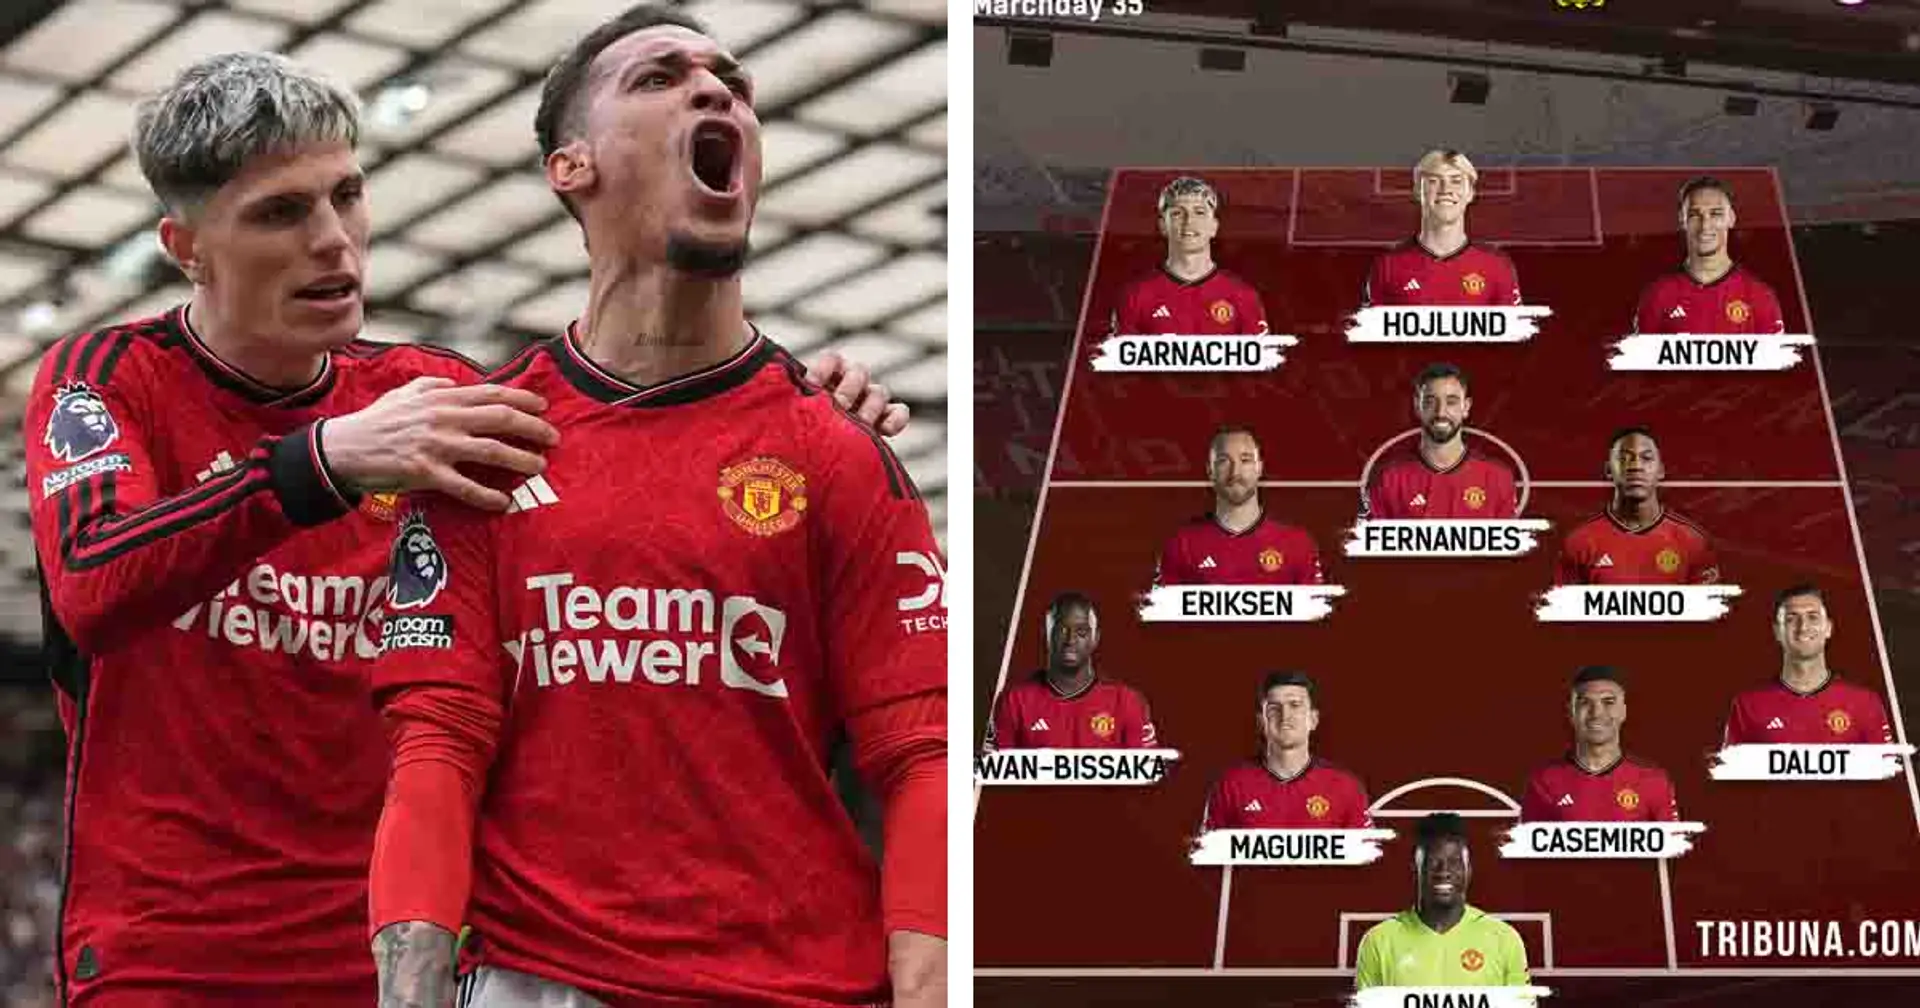 Man United's biggest strengths from Burnley draw shown in lineup - four players feature